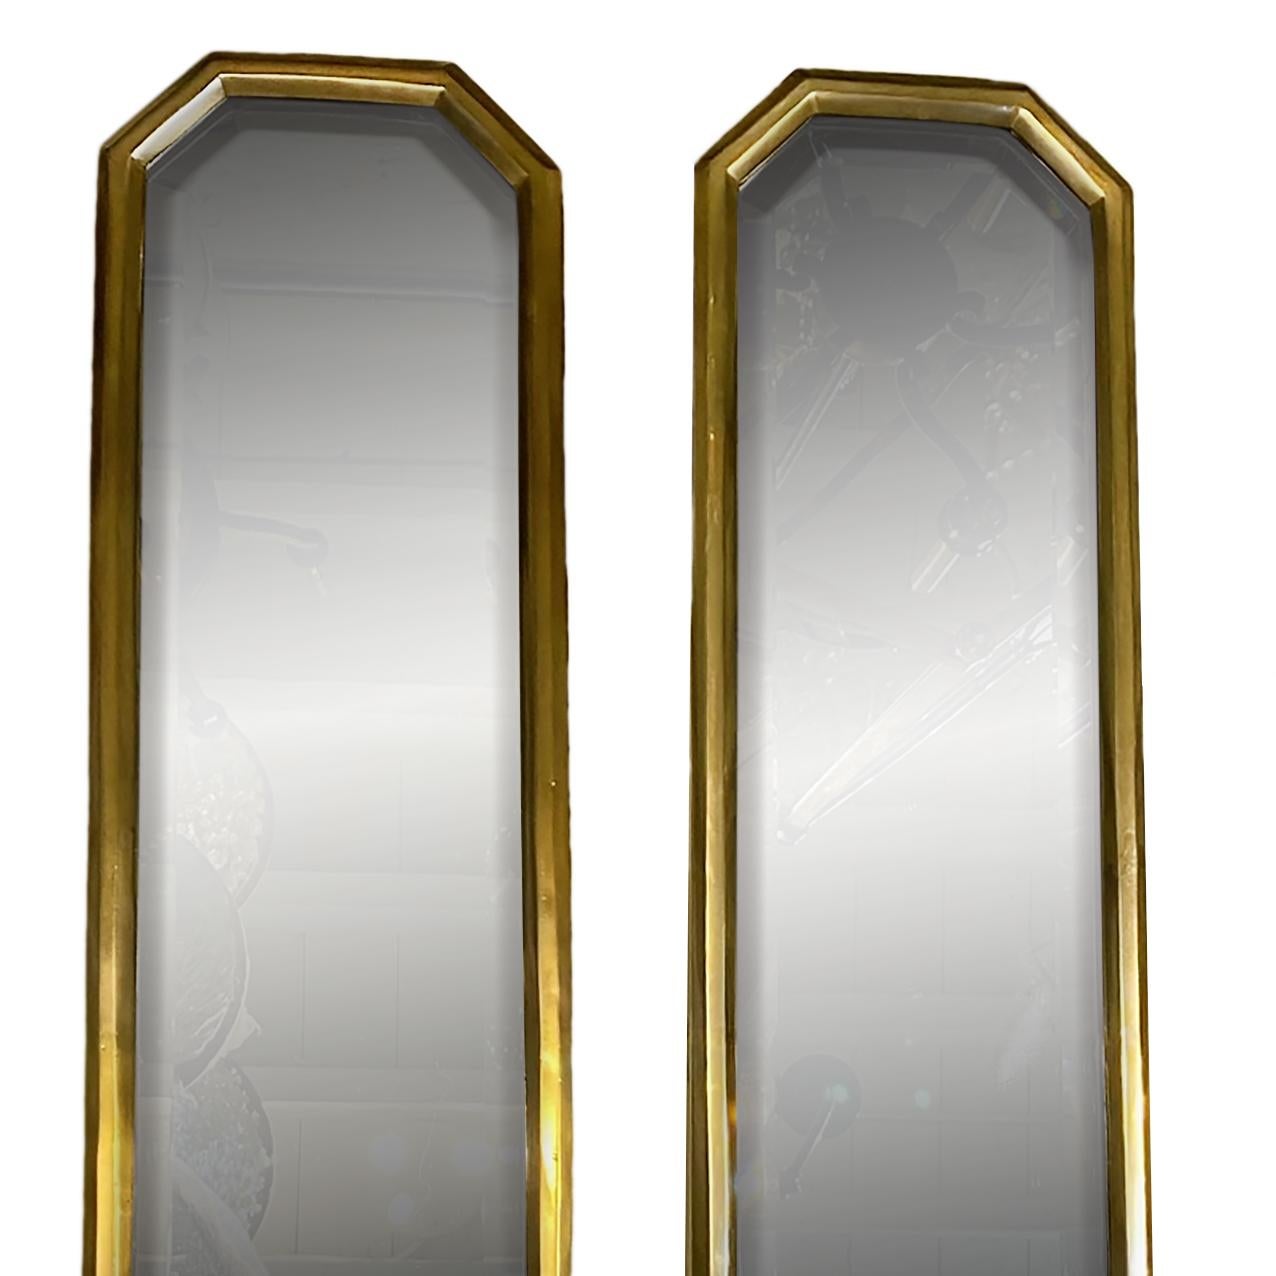 A pair of tall circa 1950's French gilt bronze single light beveled mirror sconces.

Measurements:
Height 32